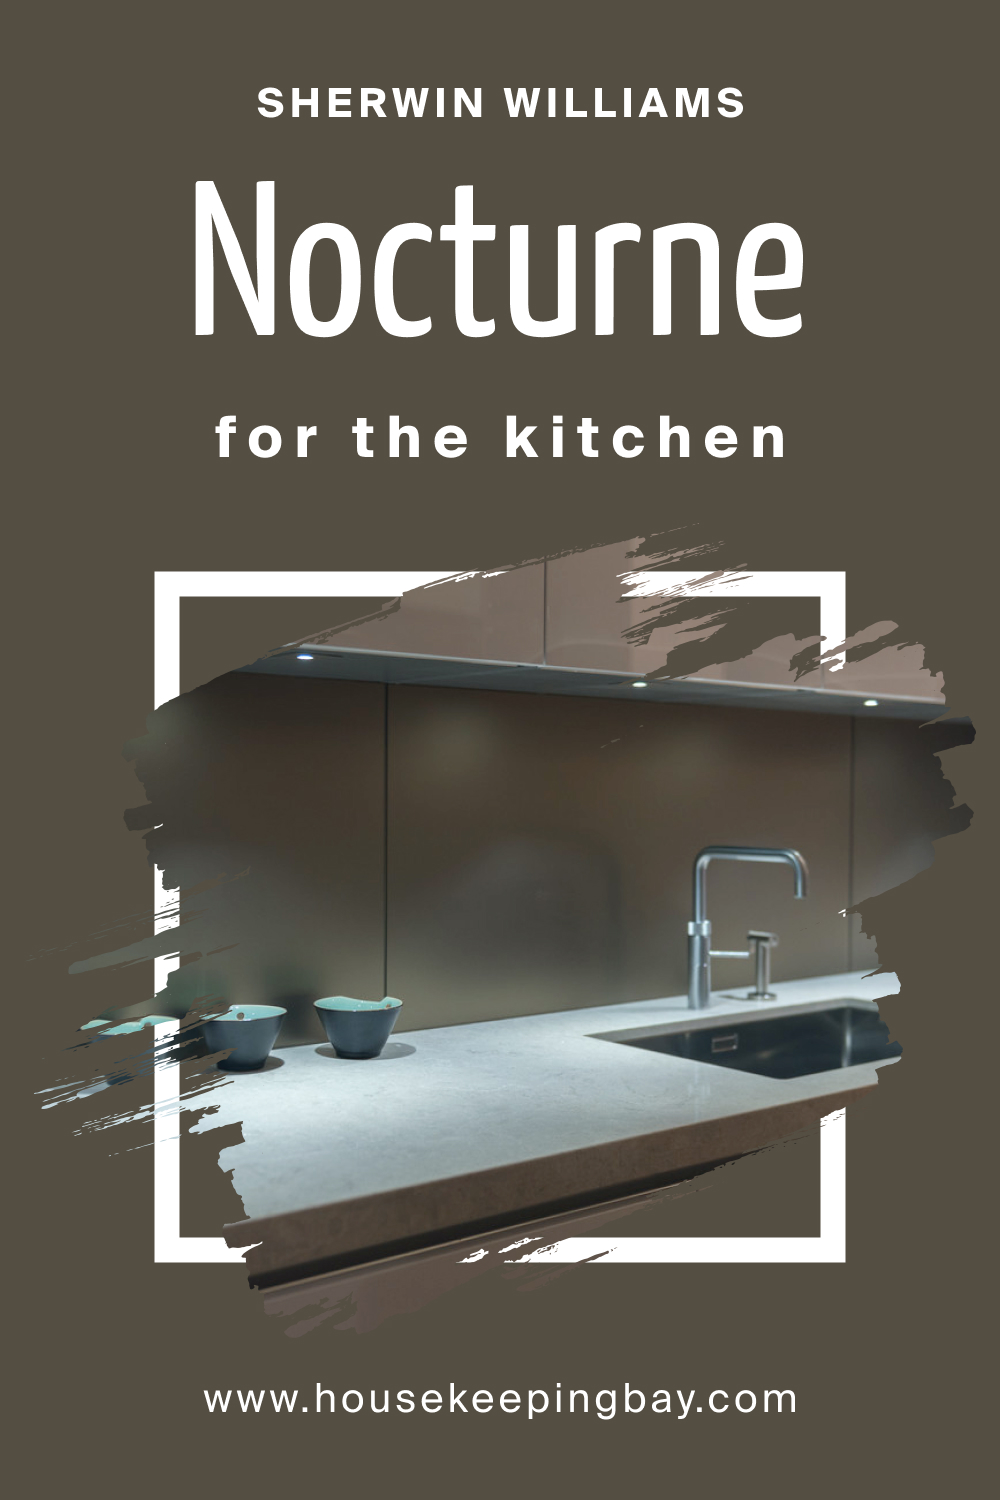 Sherwin Williams. SW 9520 Nocturne For the Kitchens